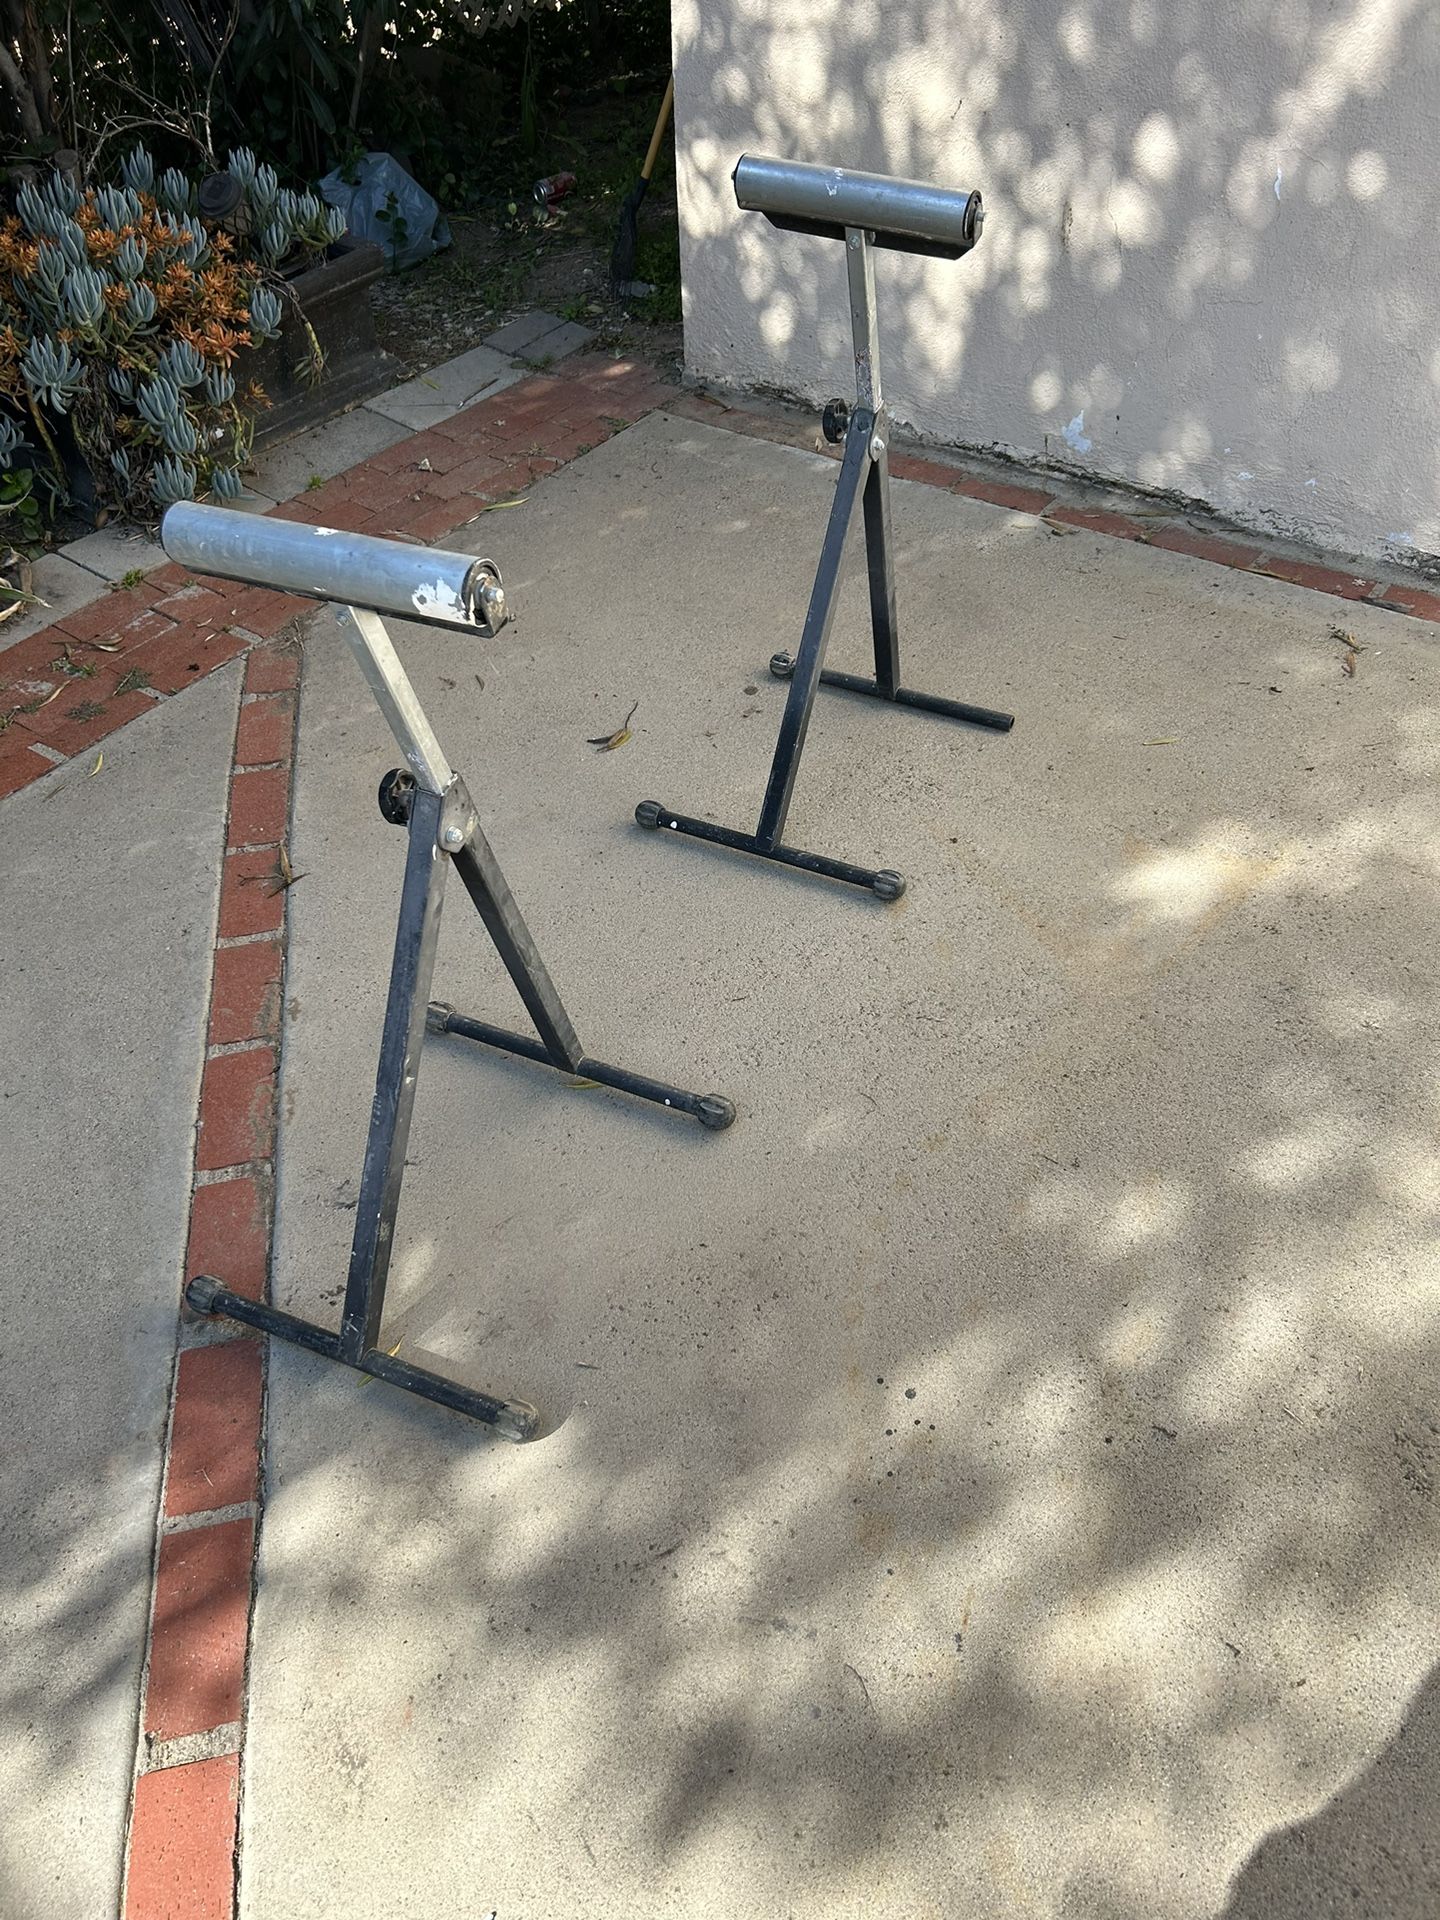 Rolling Stands